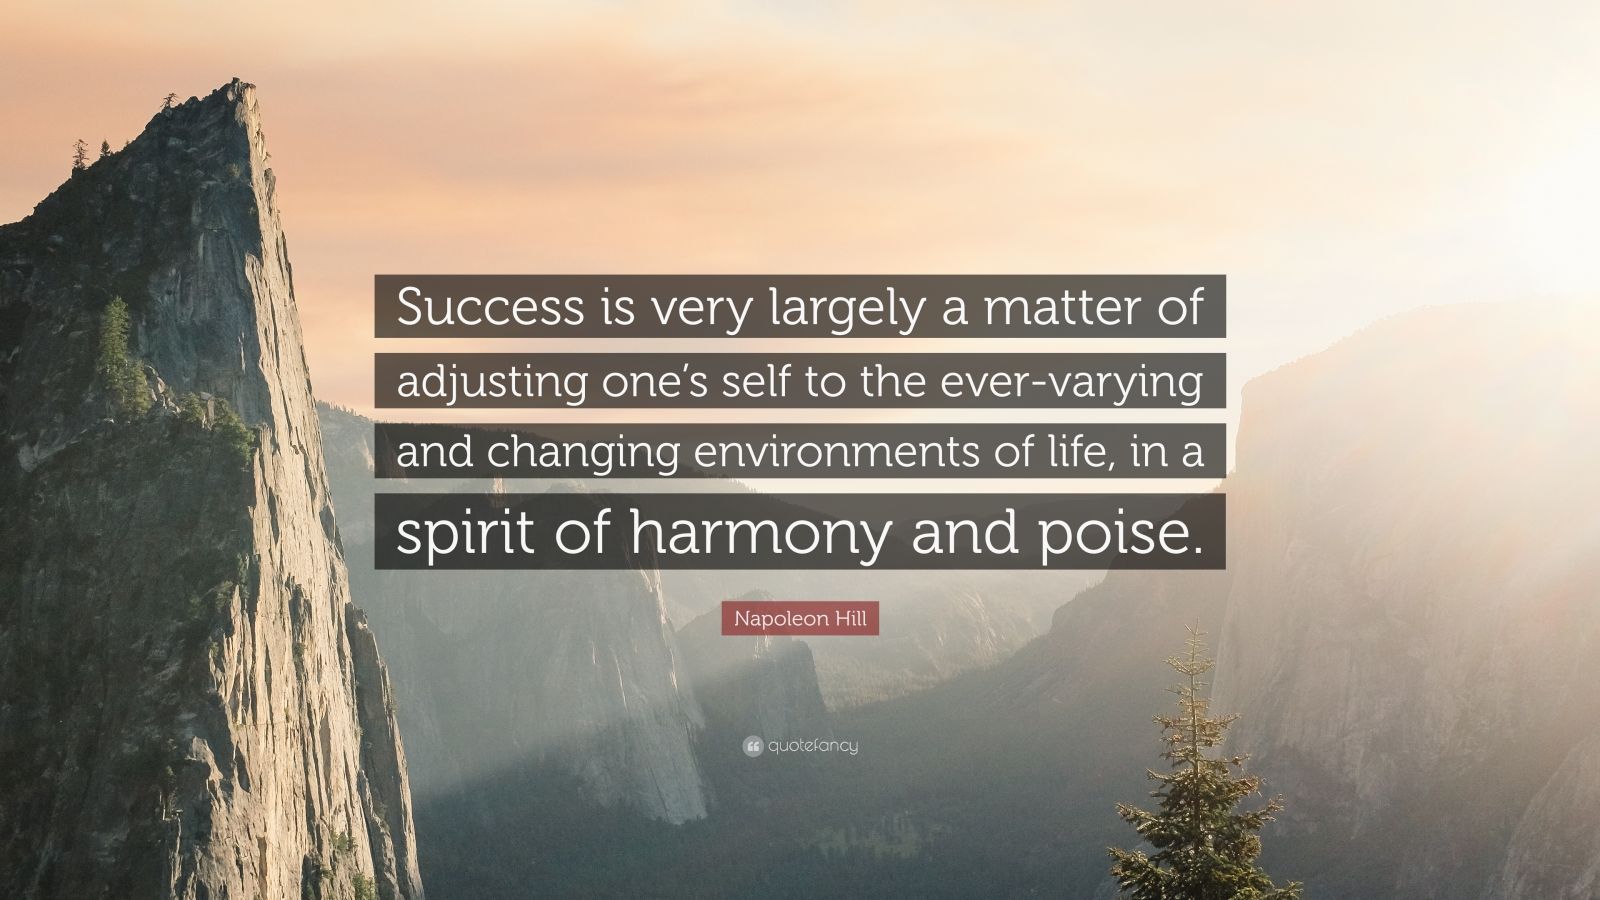 Napoleon Hill Quote: "Success is very largely a matter of ...